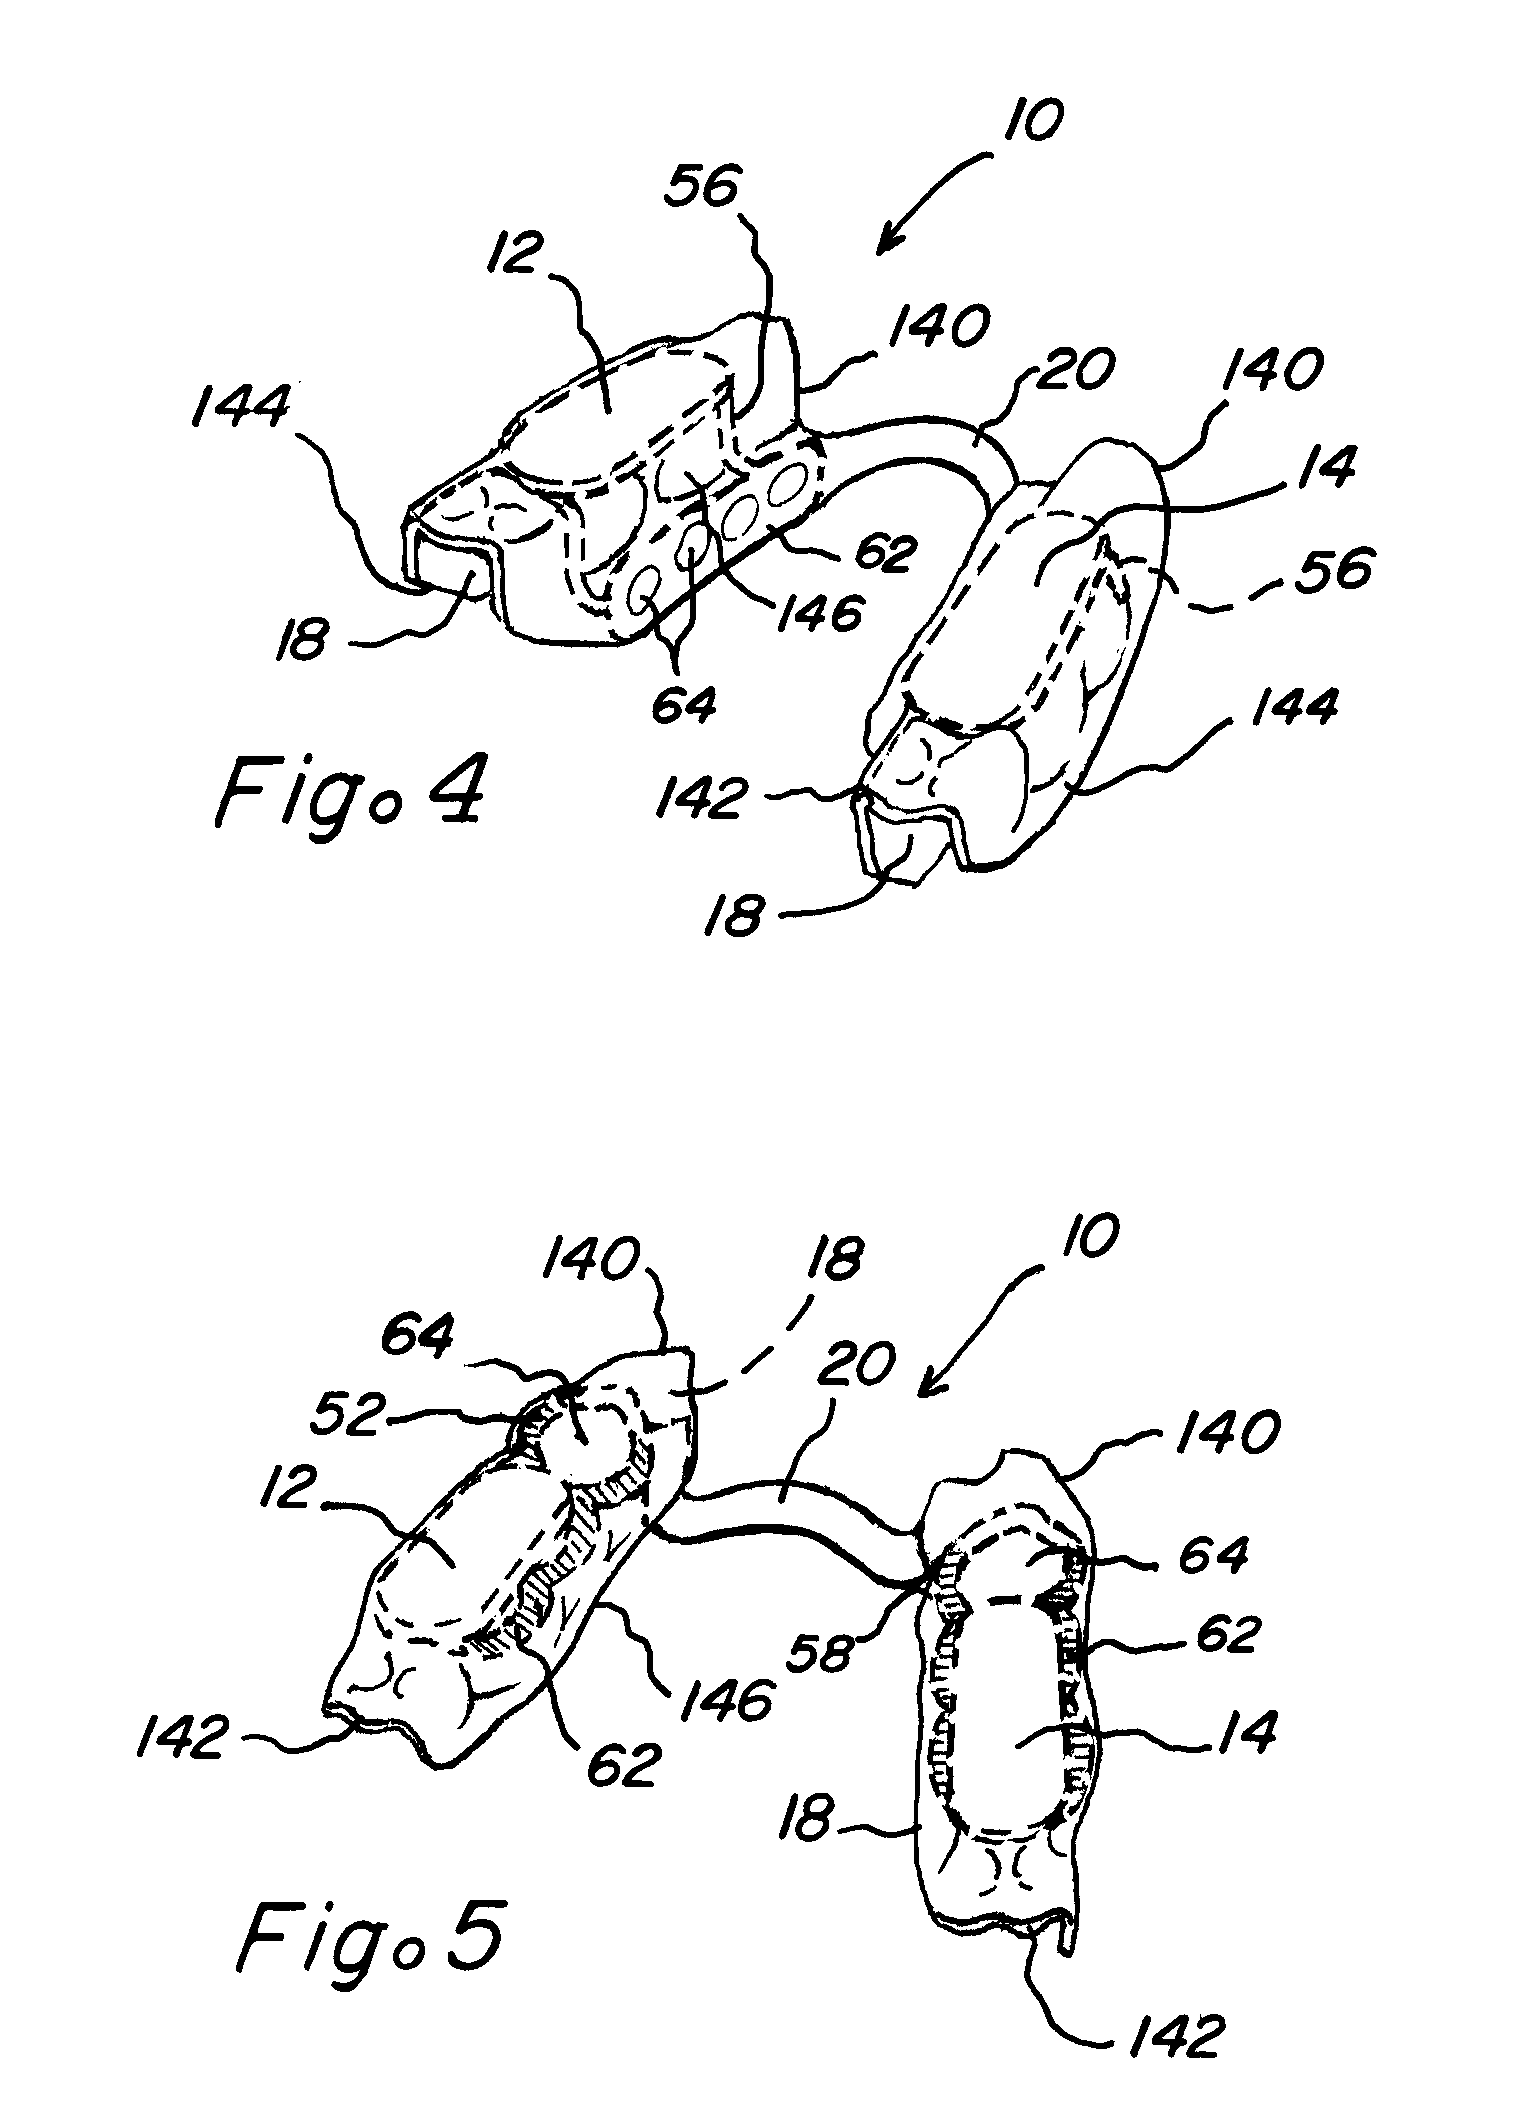 Oral appliances with major connectors and methods for manufacture